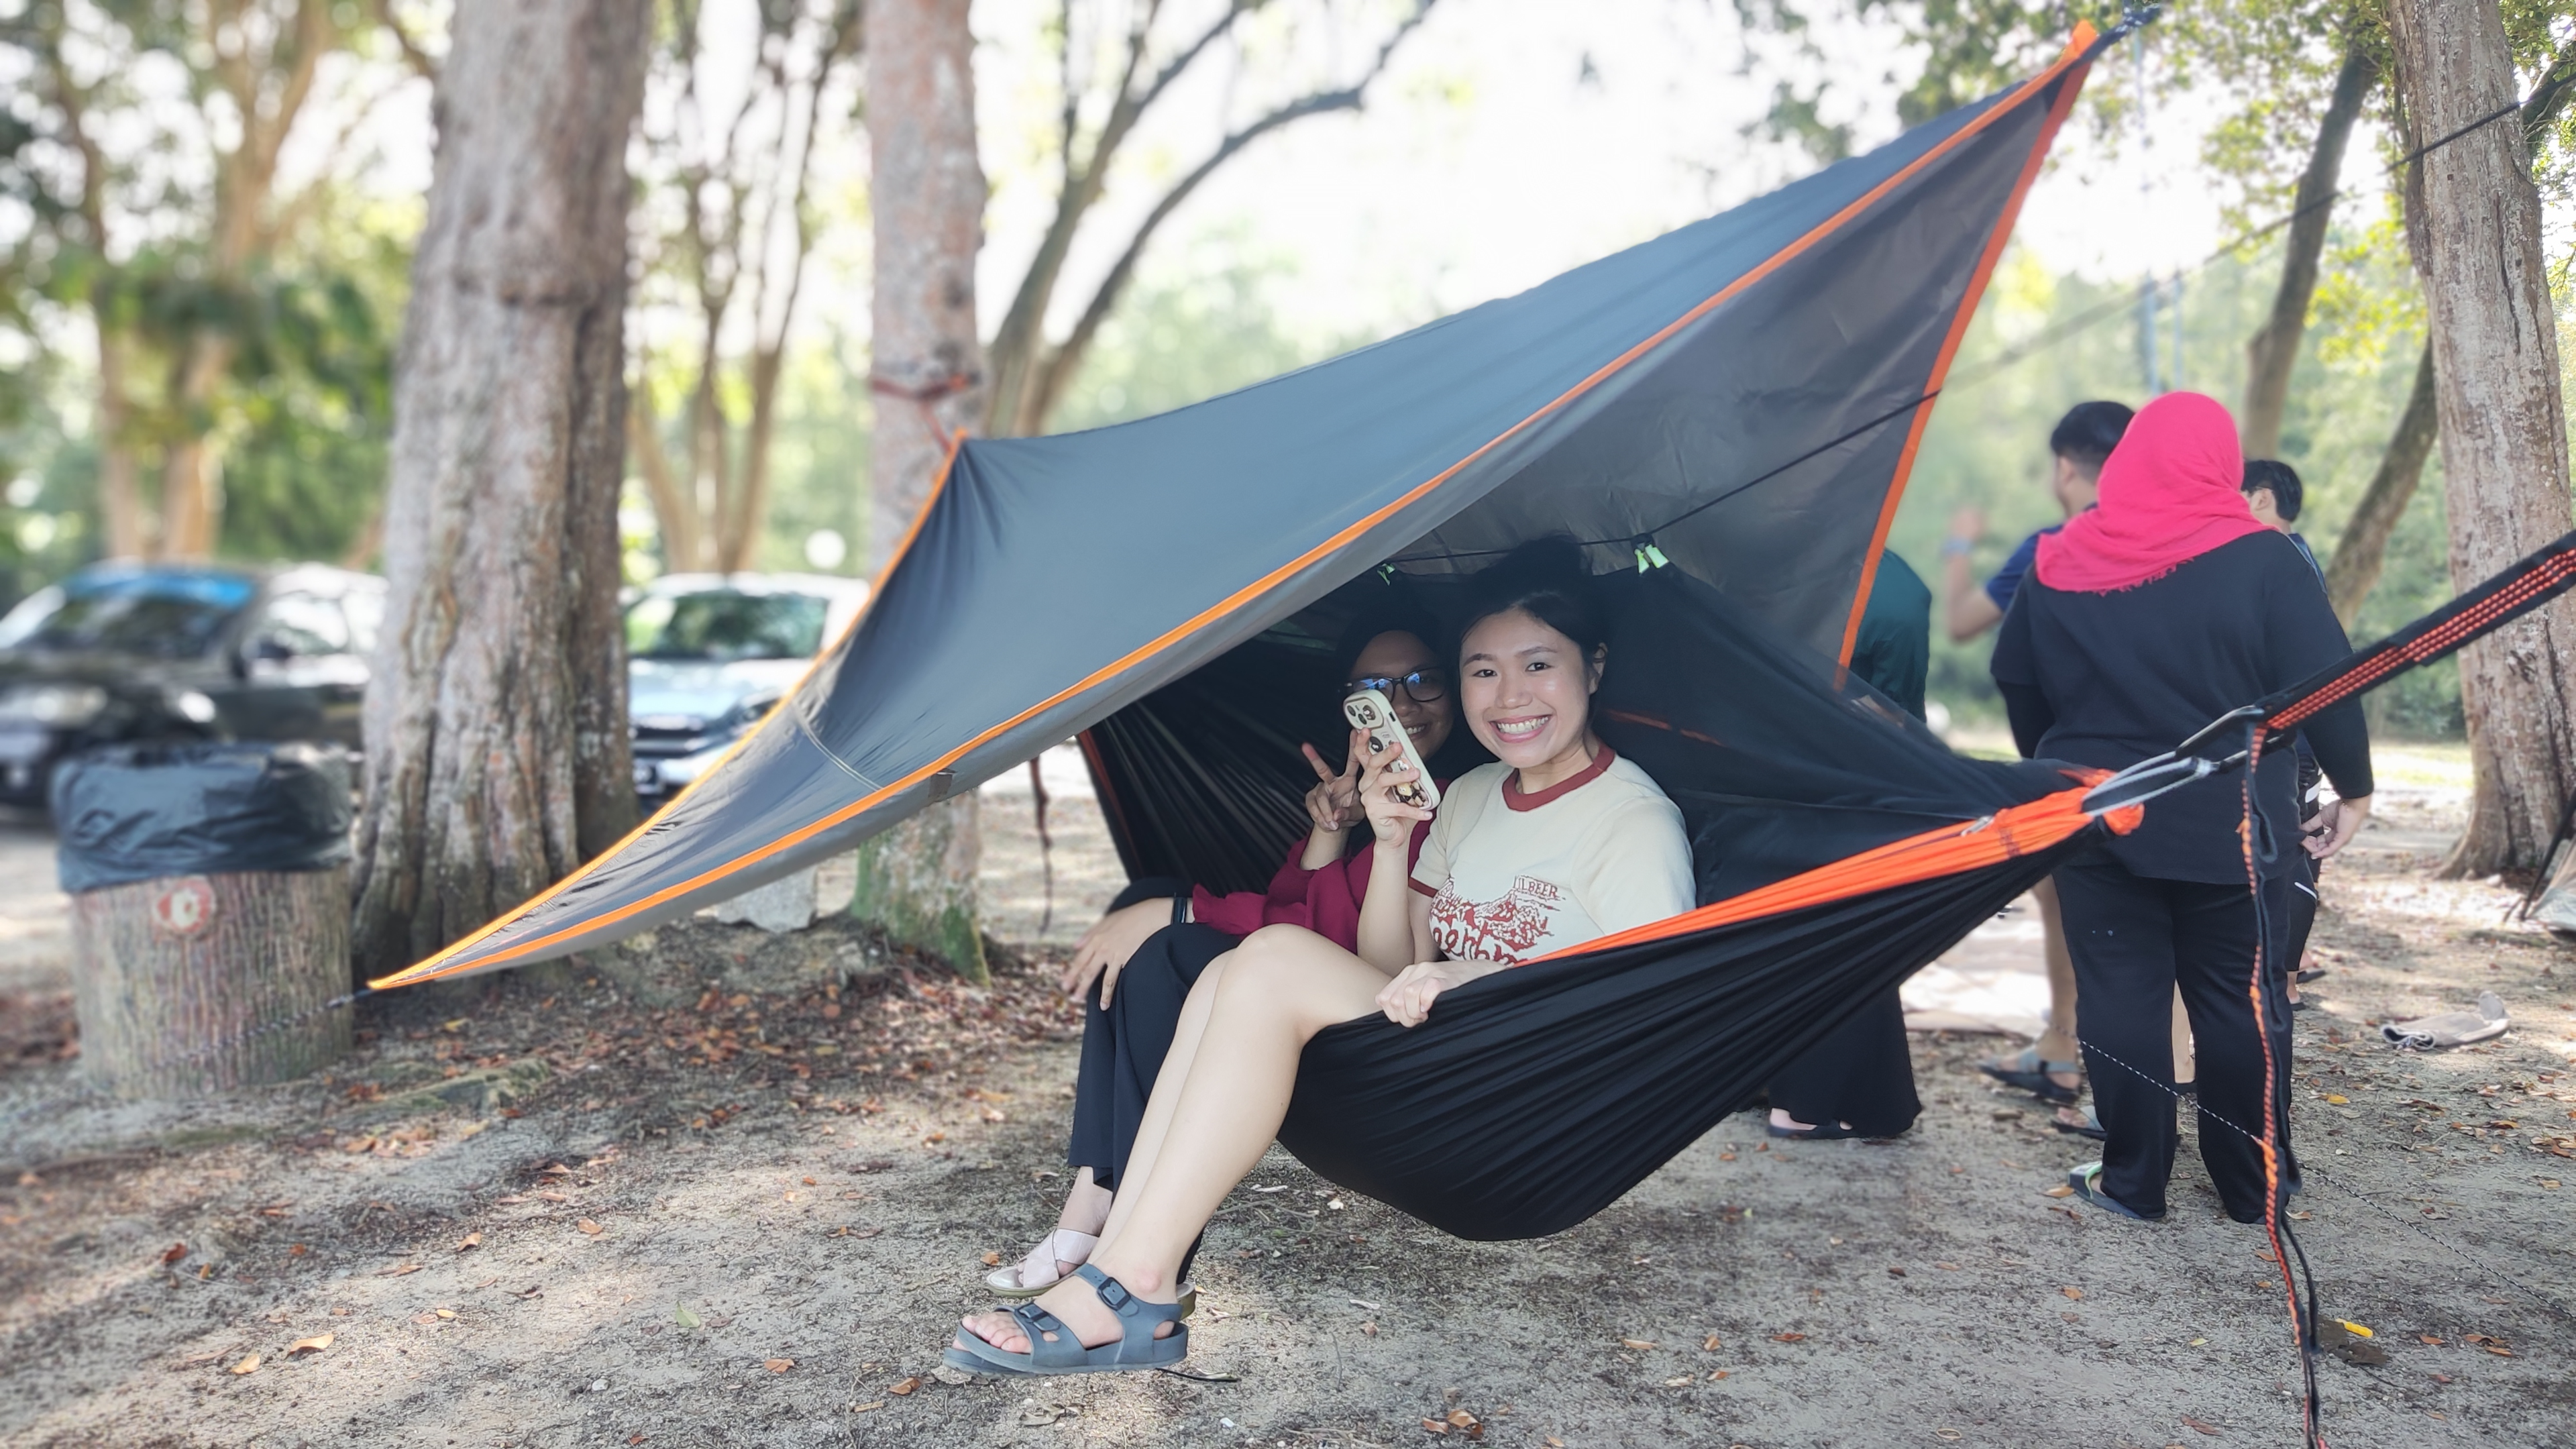 A group of people enjoying glamping in Malaysia's urban and jungle locations